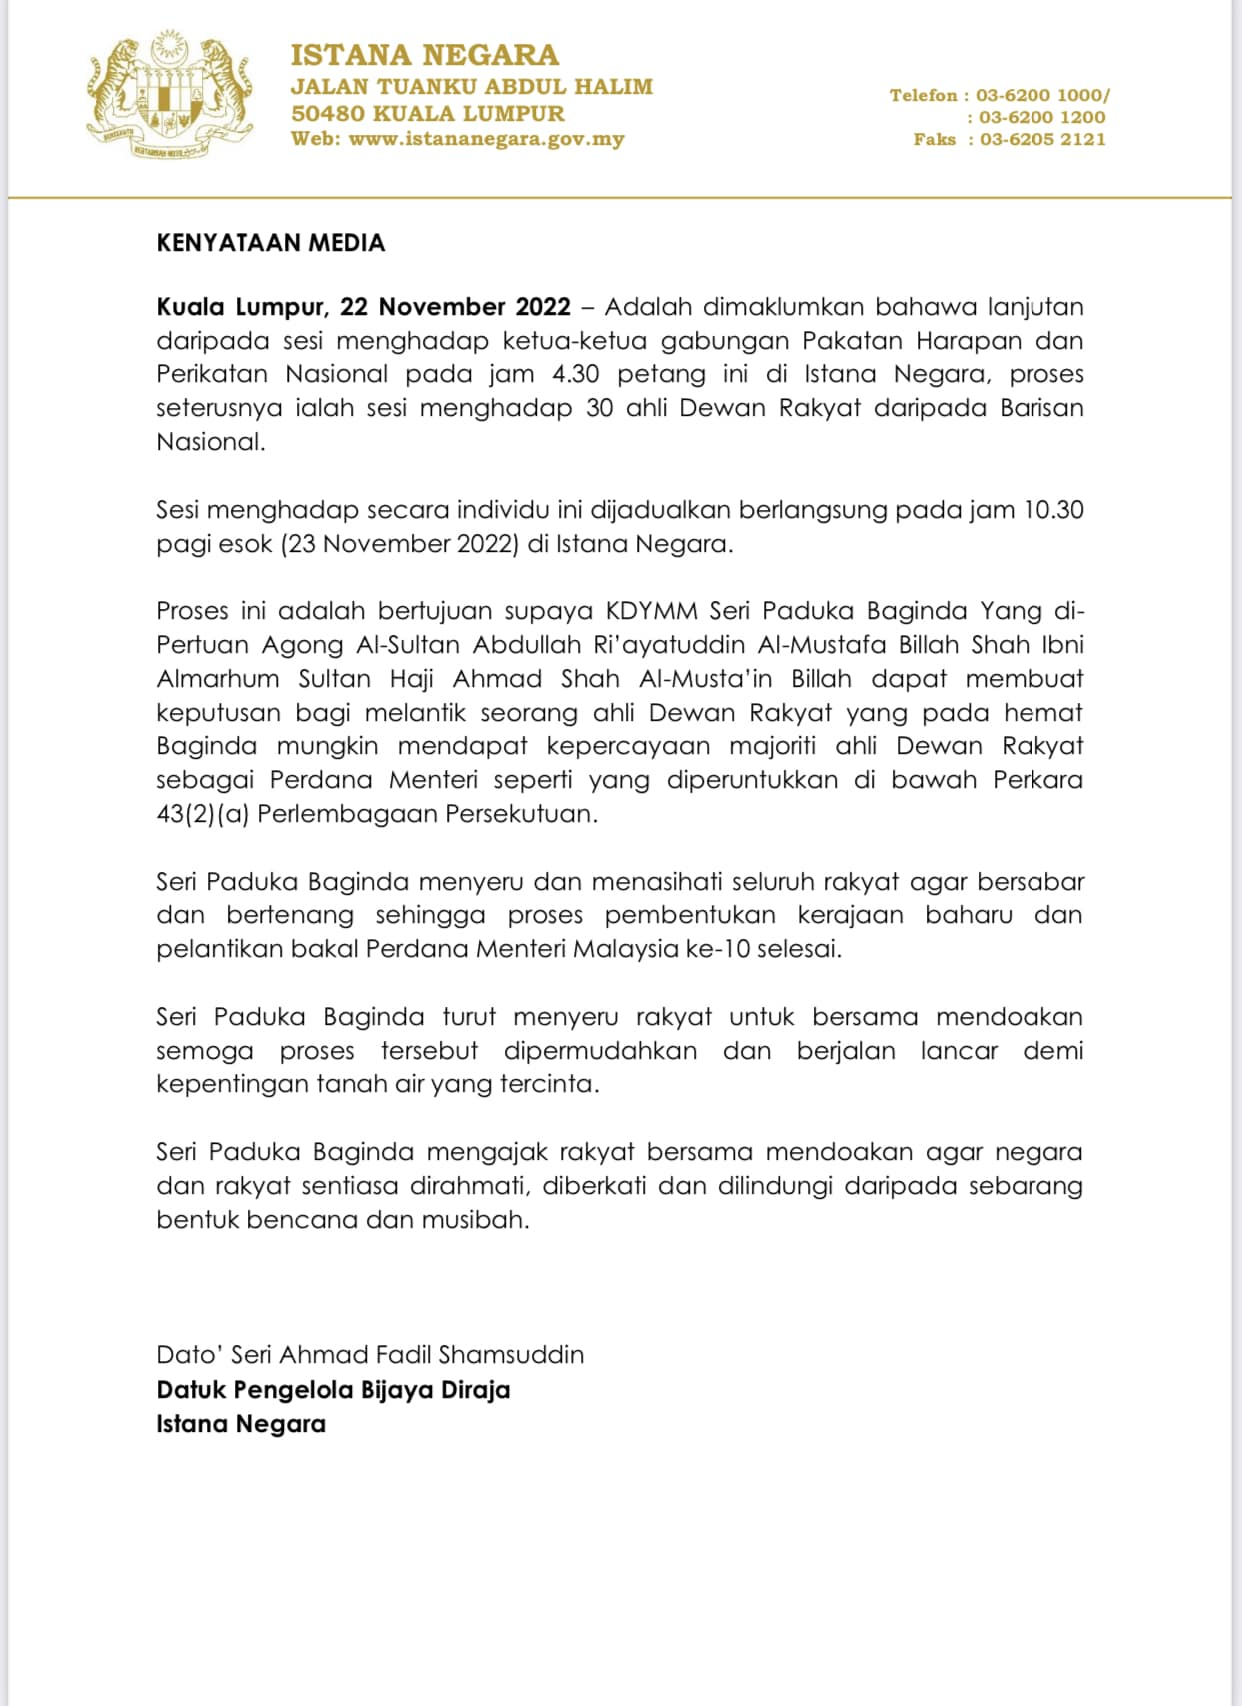 Official statement from the agong